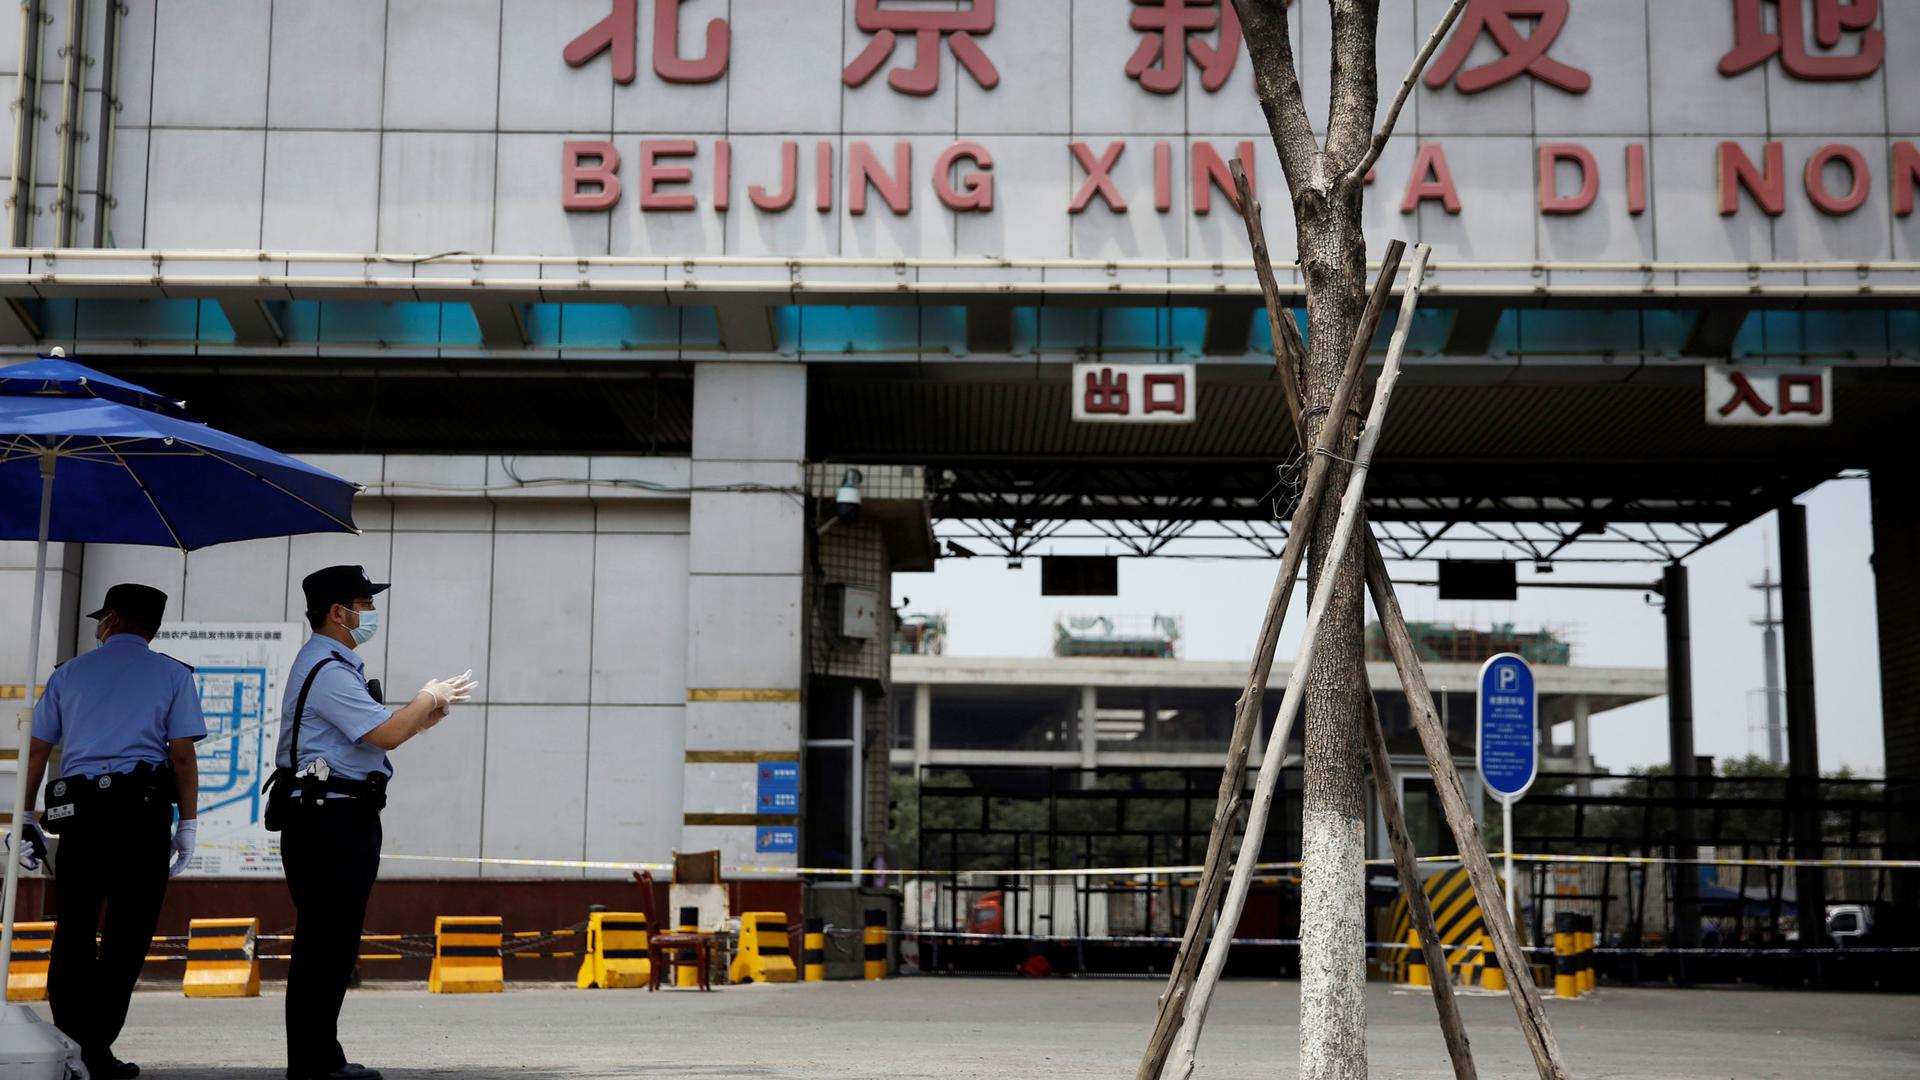 Two police officers are shown wearing protective face masks with the empty entrance to a food market in the background.